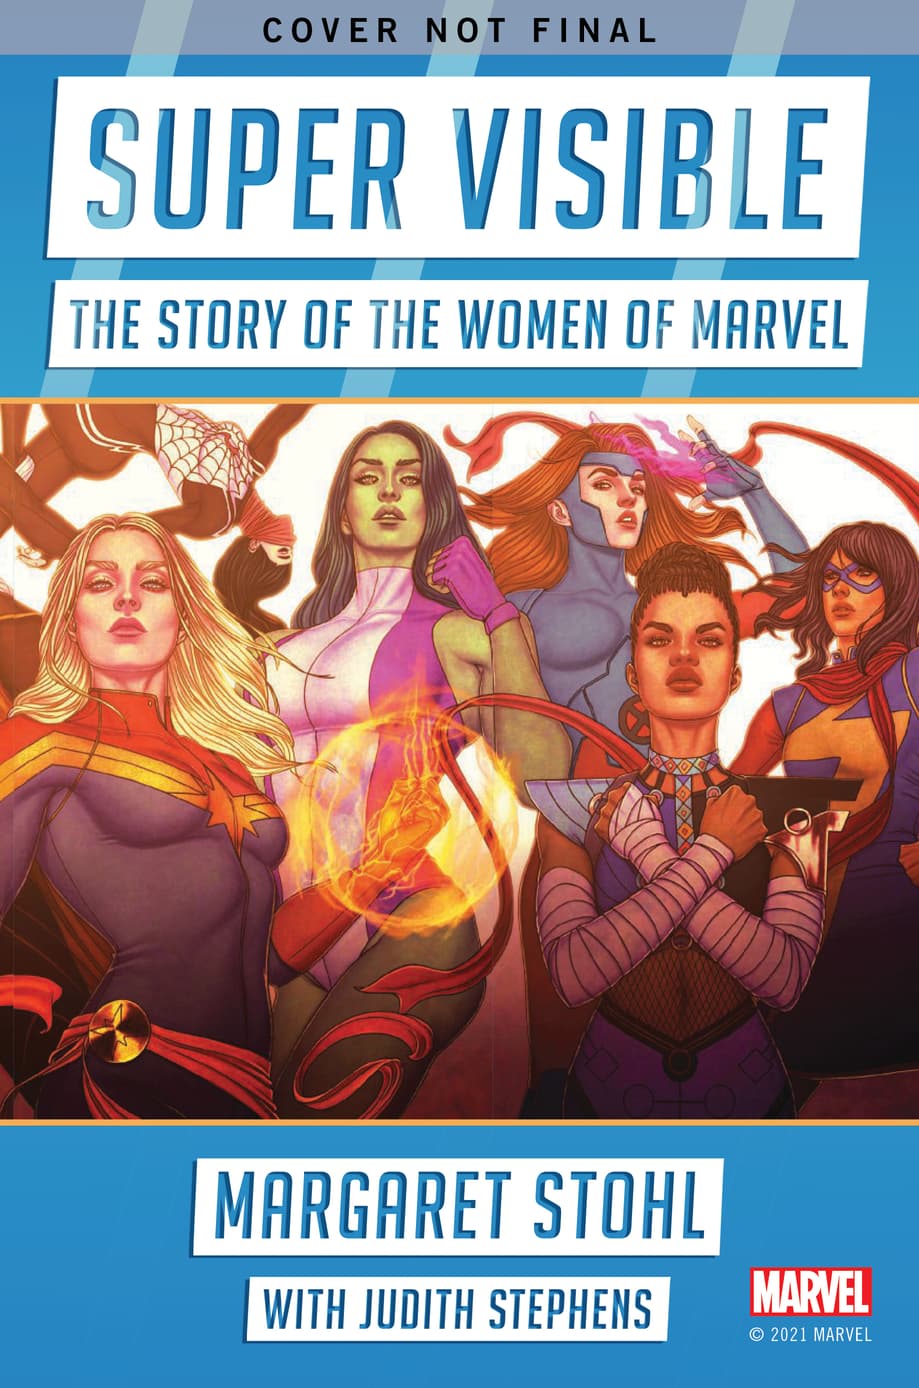 SUPER VISIBLE: THE STORY OF THE WOMEN OF MARVEL (Not Final Cover)